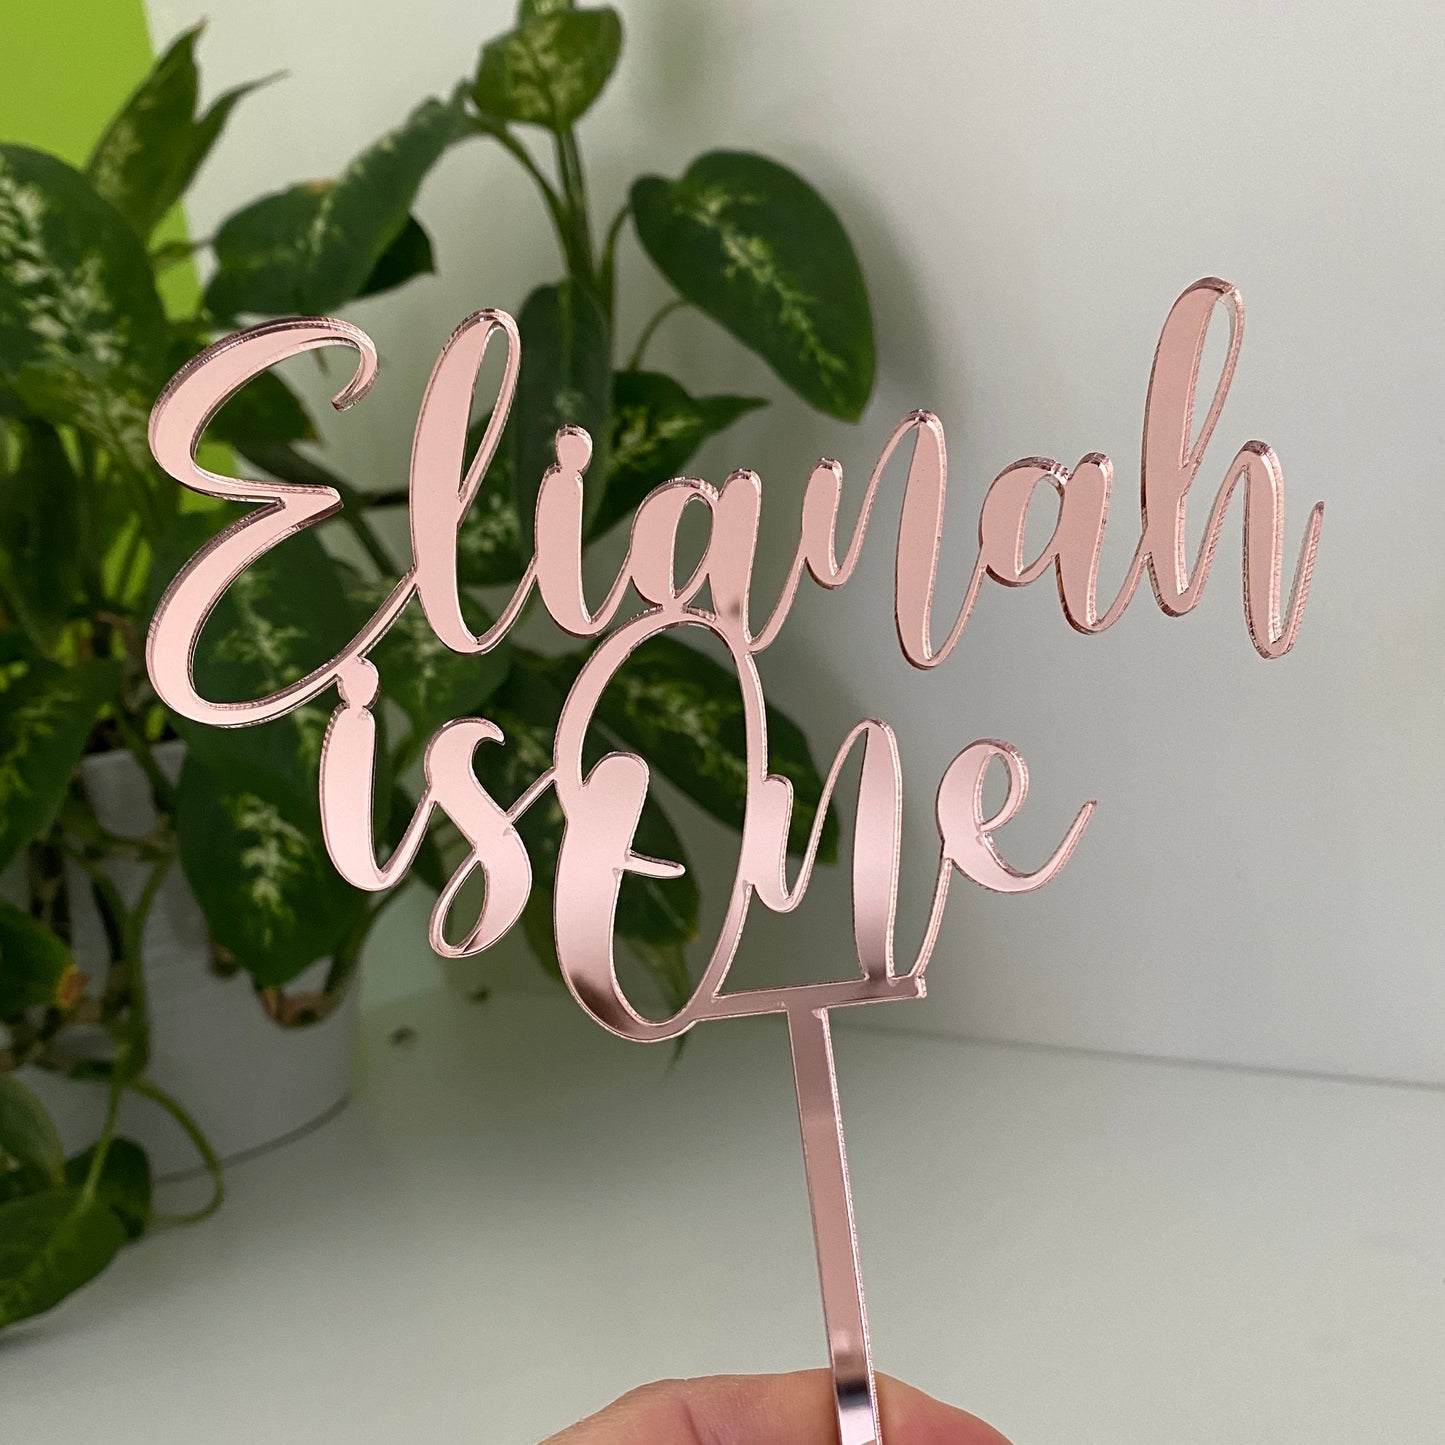 Rose gold mirror cake topper - Younique Collective